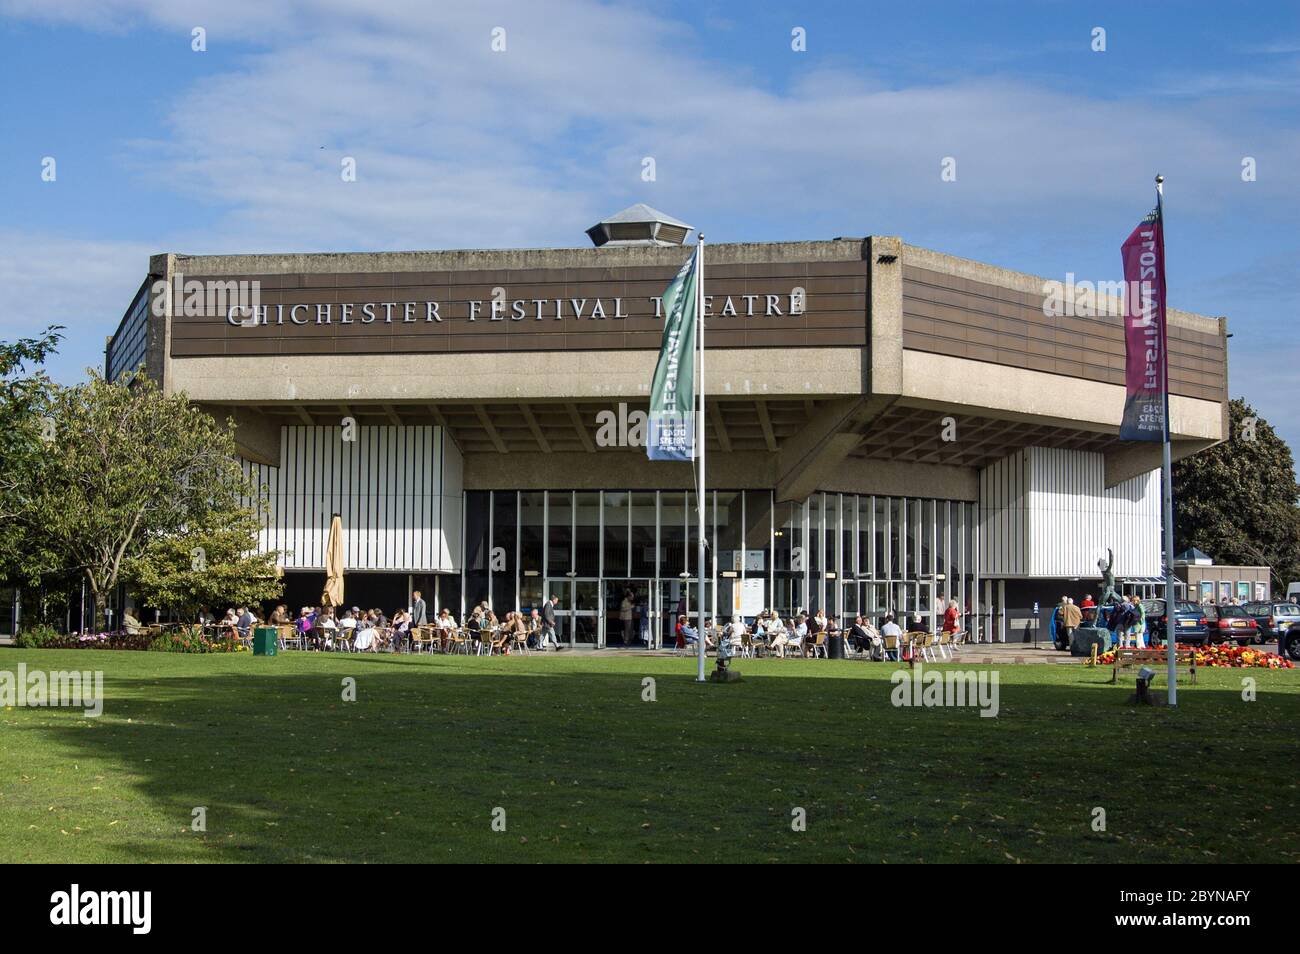 Chichester, UK - August 10, 2011:  Theatre goers enjoying the summer sunshine at Chichester Festival Theatre. The theatre continues to flourish despit Stock Photo